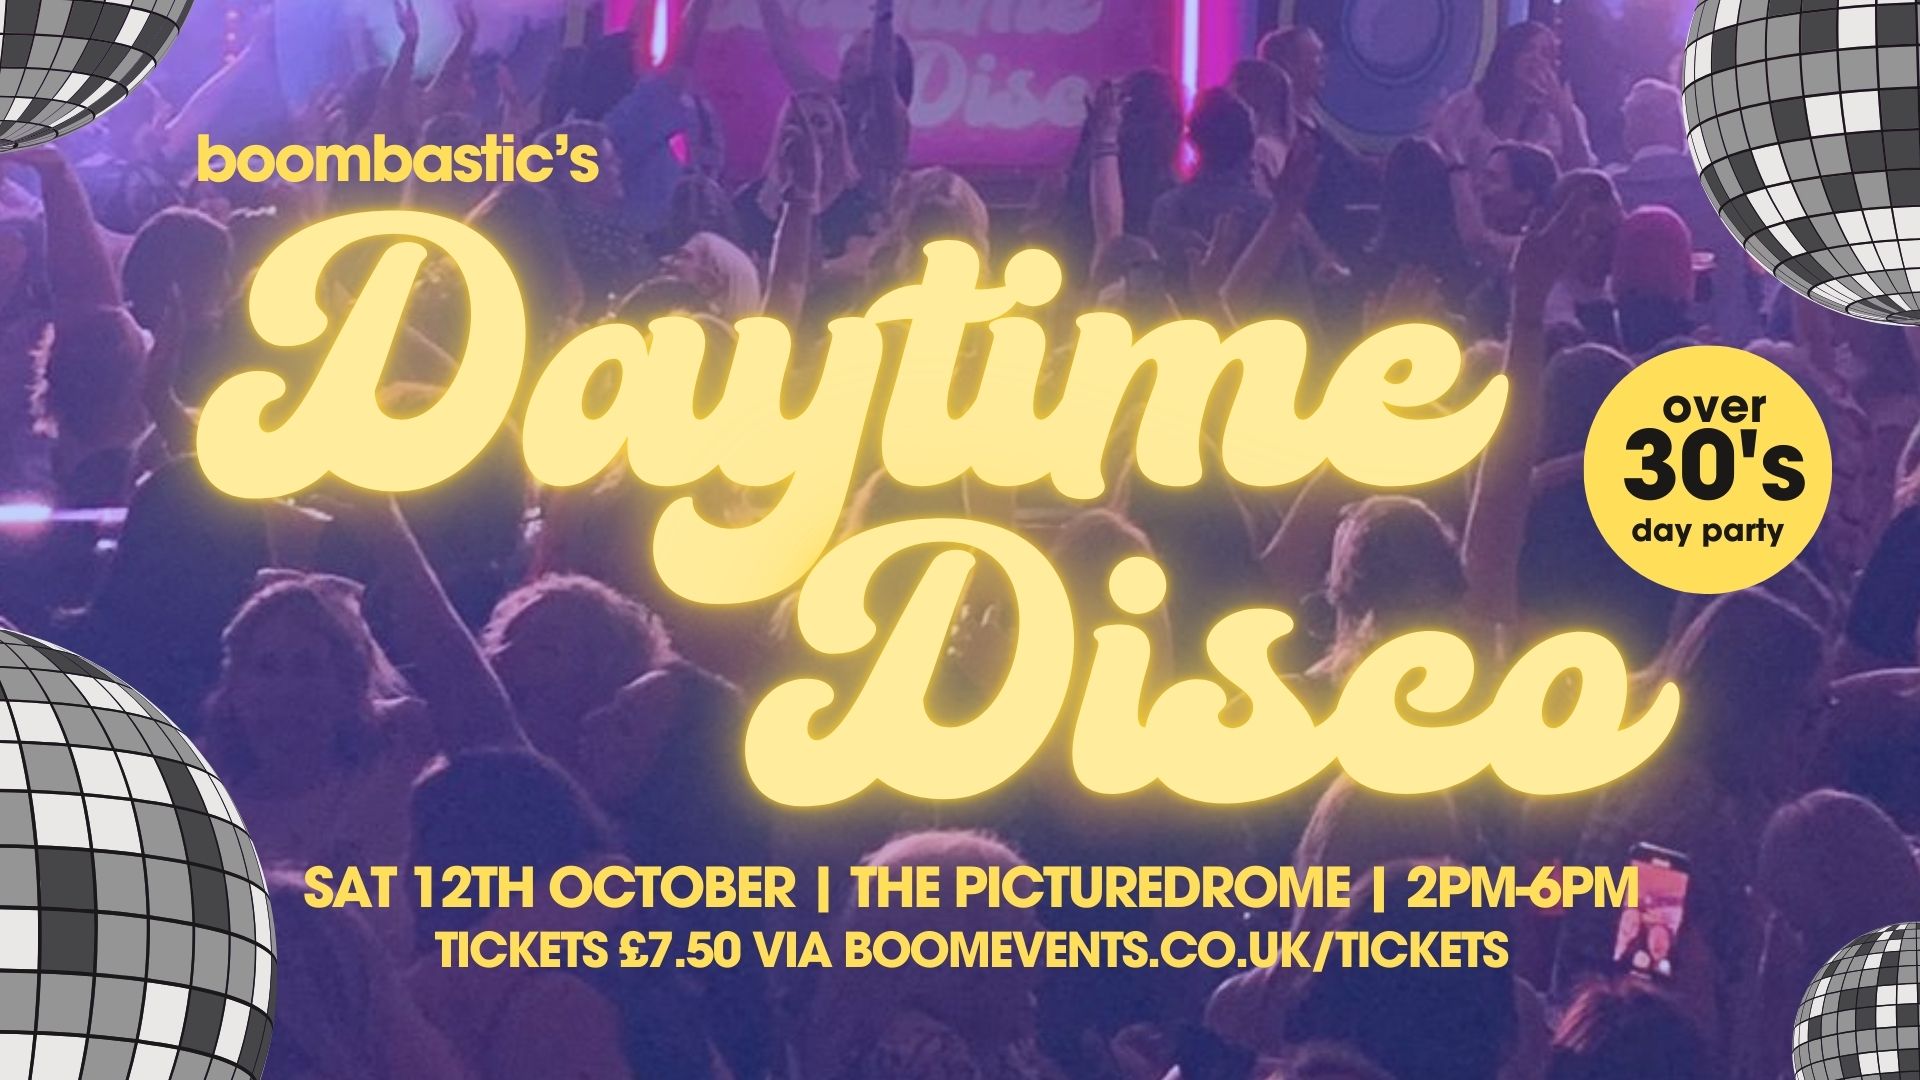 DAYTIME DISCO Northampton - For the Over 30s Crowd